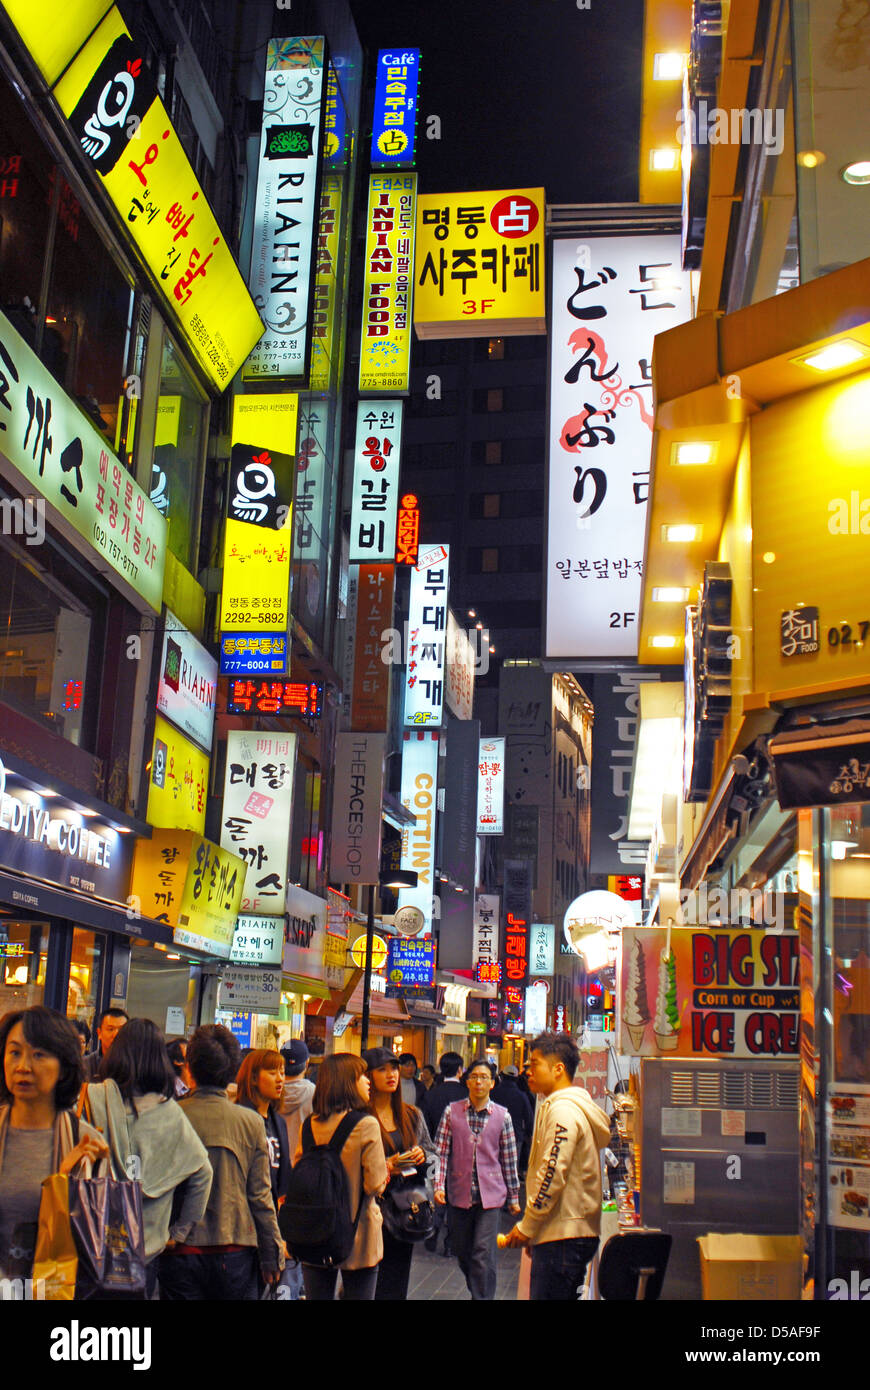 Shoppers and nightlife among the streets of Myeongdong, Seoul, South Korea Stock Photo